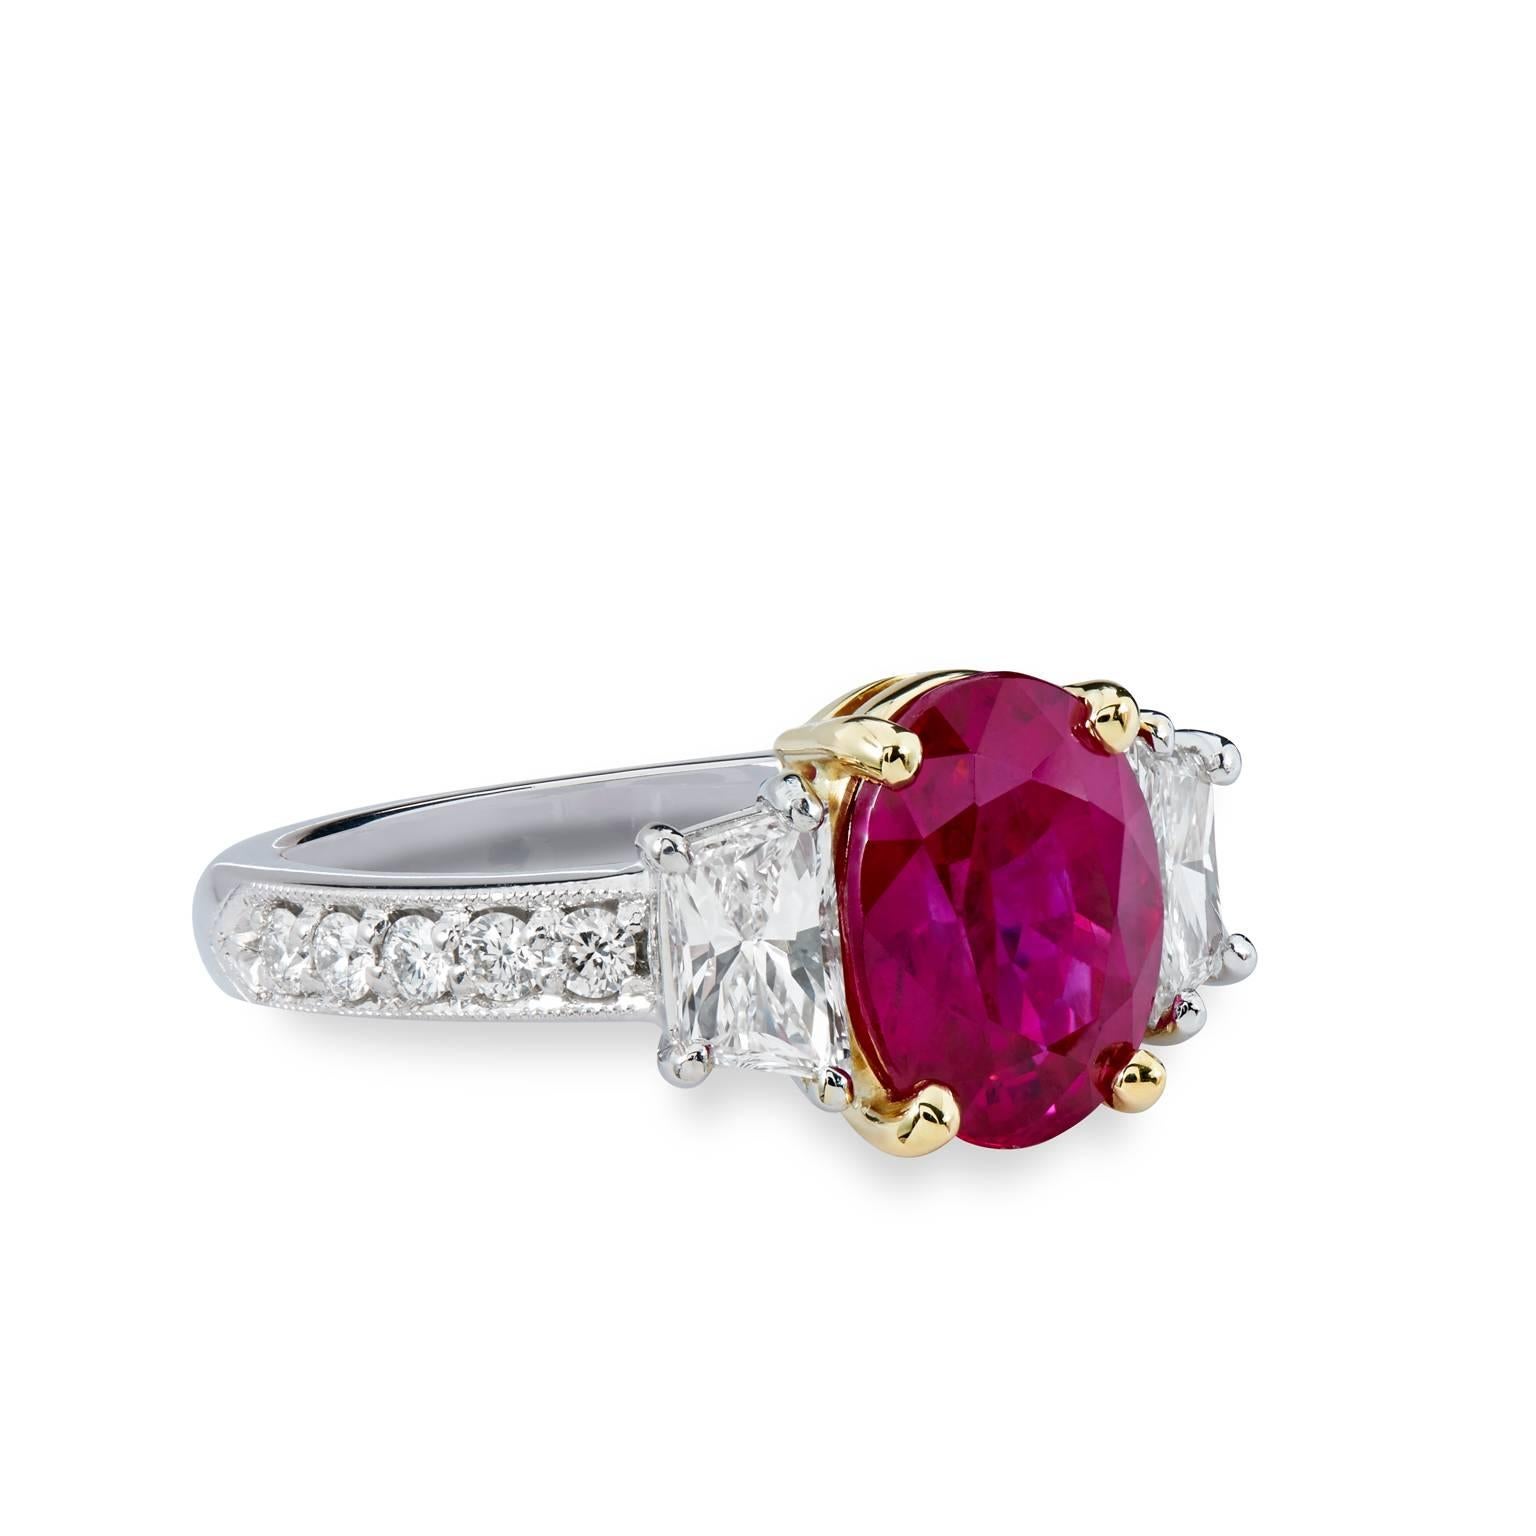 H & H GIA Certified 2.95 Burmese Ruby Diamond Gold Platinum Ring

This is a one of a kind, handmade ring, by H&H Jewels.  

This beautiful ring is created in 18 karat yellow gold that forms the bridge and gallery that affixes the striking 2.95 carat